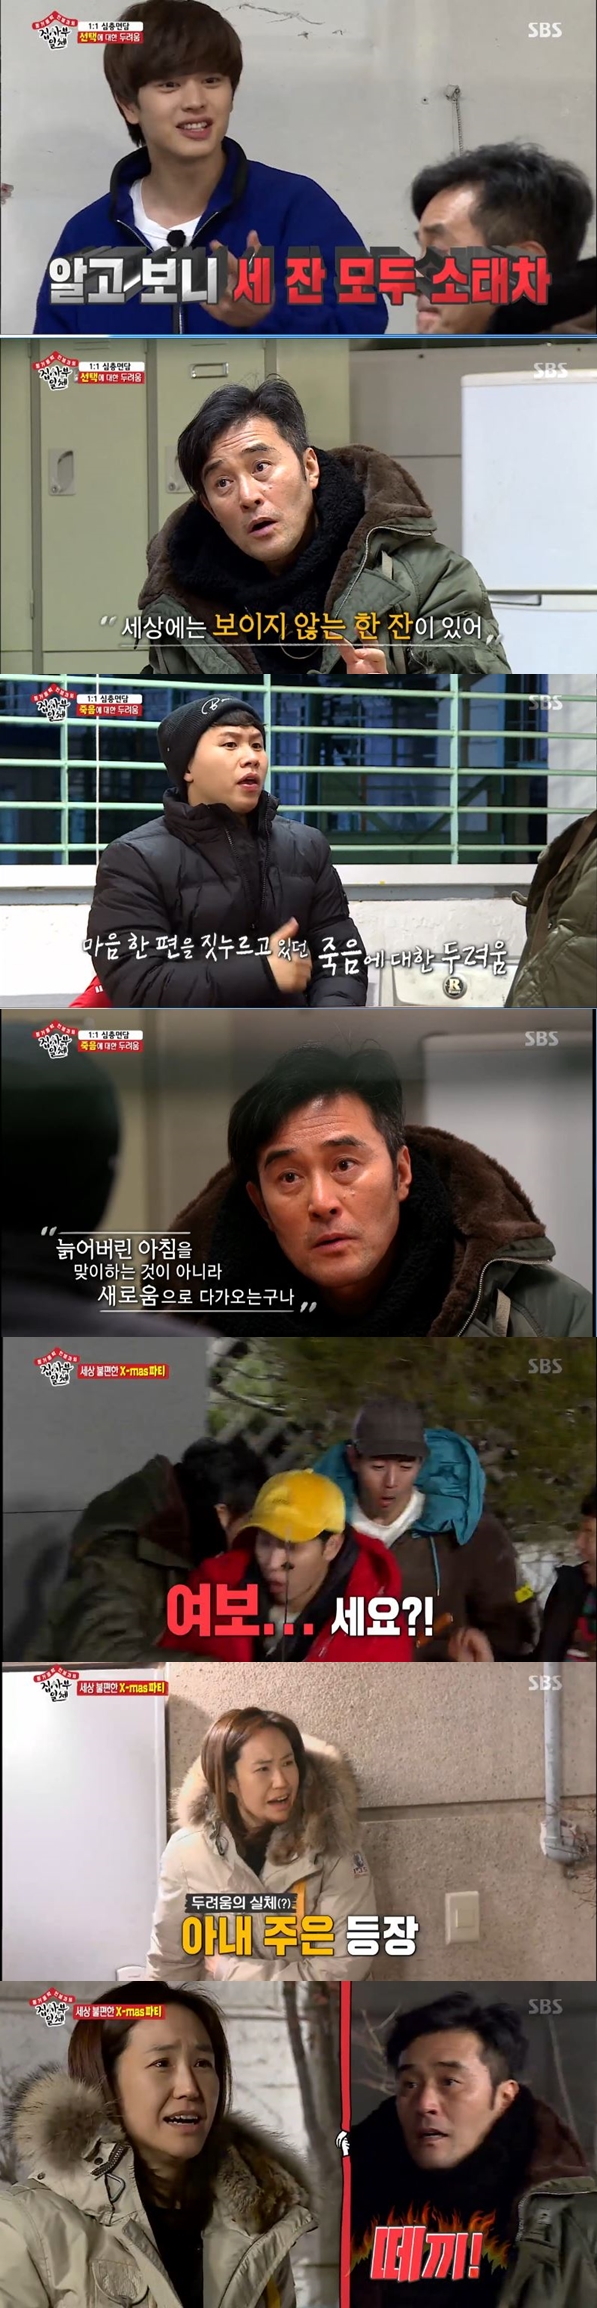 It was a real stronger than anyone for Choi Min-soo but it was a low-ranking wife wish at House.On the afternoon of the 20th, SBS entertainment program All The Butlers showed members who sent Haru with the geeky master Choi Min-soo.Yang Se-hyeong, who only cheated on others, was properly hit by Choi Min-soo.Yang Se-hyeong was called separately to Choi Min-soo with the upbringing material, where he experienced CBR.Choi Min-soo ordered the two embarrassed people to use gas masks and then I was smoked with a bare face.When the smoke came up, Choi Min-soo coughed and fell to the floor, and Yang Se-hyeong worried about him and took off his gas mask.At that point Choi Min-soo laughed loudly and shouted, Bang! and the two stared blankly at Choi Min-soo.After successfully completing the CBR secret camera, Choi Min-soo entered a 1:1 in-depth interview with the members.The first runner was Lee Seung-gi, and Choi Min-soo asked him, What are you most afraid of?Lee Seung-gi said seriously, Fear of Choices so Choi Min-soo said, There is no fault for Choices.Choi Min-soo then placed the water in front of Lee Seung-gi in three water cups, saying, One cup is green tea, two cups are tea.Lee Seung-gi picked a glass while thinking, but it was a tea, but all three cups prepared by Choi Min-soo contained tea.In response, Choi Min-soo said: There is always one glass in the world that is not visible, so nothing is wrong with Choices.Next up, Yang Se-hyeong seriously talked about his fear of death: The family was all short-lived, so theres a fear that I wouldnt be the same, he said.He said, I am worried about having a family like me because of this.Choi Min-soo began speaking on the basis of his own experience in Yang Se-hyeongs serious troubles; Choi Min-soo was judged to be a deadline in her second year of middle school.At first, he said frankly that he was in fear of death, and then said, At some point death was a blessing.It was all precious after all that I admitted, Choi Min-soo said, Dont be too afraid to die, its the first time for you, but everyone has experienced it.Dont be too afraid because everything in your life is precious. Choi Min-soo then hugged Yang Se-hyeong, saying, Thank you for telling me so seriously.The members were impressed by the masters sincere advice.Lee Seung-gi acknowledged Choi Min-soo, saying, I thought it was a geek at first, but there seems to be a stronger real in the geek.Choi Min-soo was ashamed and tried to change the topic.Yang Se-hyeong said, Now this is also cool. Choi Min-soo continued to praise Choi Min-soo, and Choi Min-soo left first.When the members did not come out, they came back to the appearance of a geek master, shouting Come quickly.As he approached Choi Min-soos House, his proud appearance in front of the members disappeared.Choi Min-soo walked cautiously as she took members to the rooftop, not the House.When I wondered why the members were doing it, I said, Somehow I feel like Im living on it.The members who climbed to the roof teased Choi Min-soo as he continued to feel uneasy, saying, Why do you think prison is more comfortable than house?Choi Min-soo was trying to send the members to eat marshmallows quickly because of his wife, Kang Ju.I asked the members to be quiet on the roof, but when the atmosphere rose, he sang, and his wife came up on the roof. When his wife appeared, Choi Min-soos expression changed.My wife was angry, What are you doing on the roof now? and invited the members into the house.When the members called Choi Min-soo the master, Kangju laughed, and Choi Min-soo did not respond.After entering the house, the members took a back to Kang Ju-eun and gave Choi Min-soo a vengeance to Haru in the prison which was difficult.